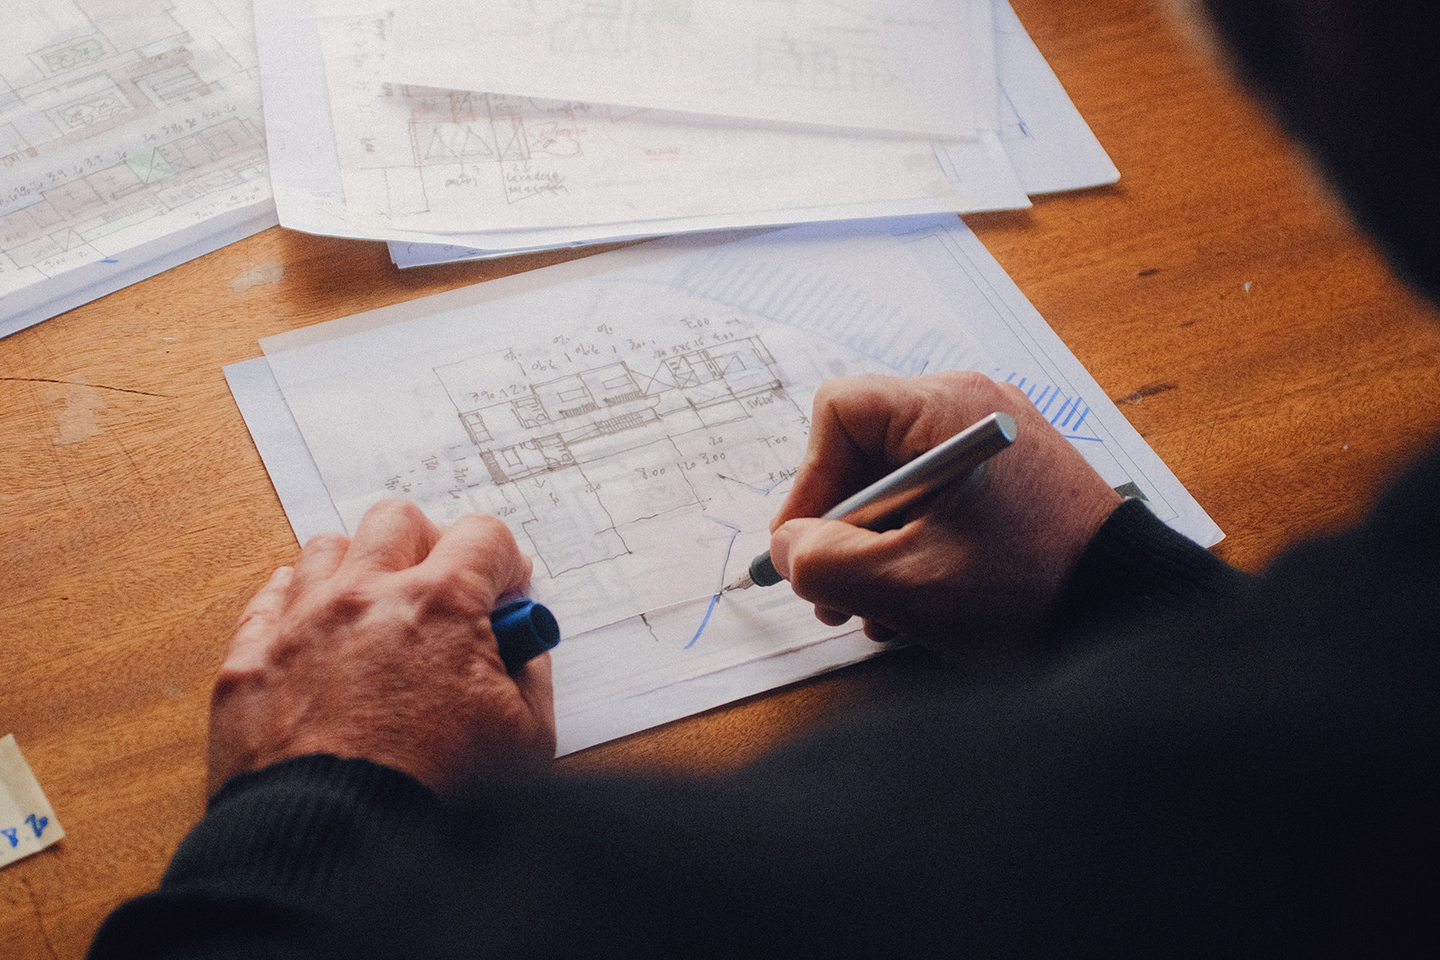 A man's hands drawings architectural floorplan drawings. Who owns the copyright after you pay an architect for drawings or plans? —The Times